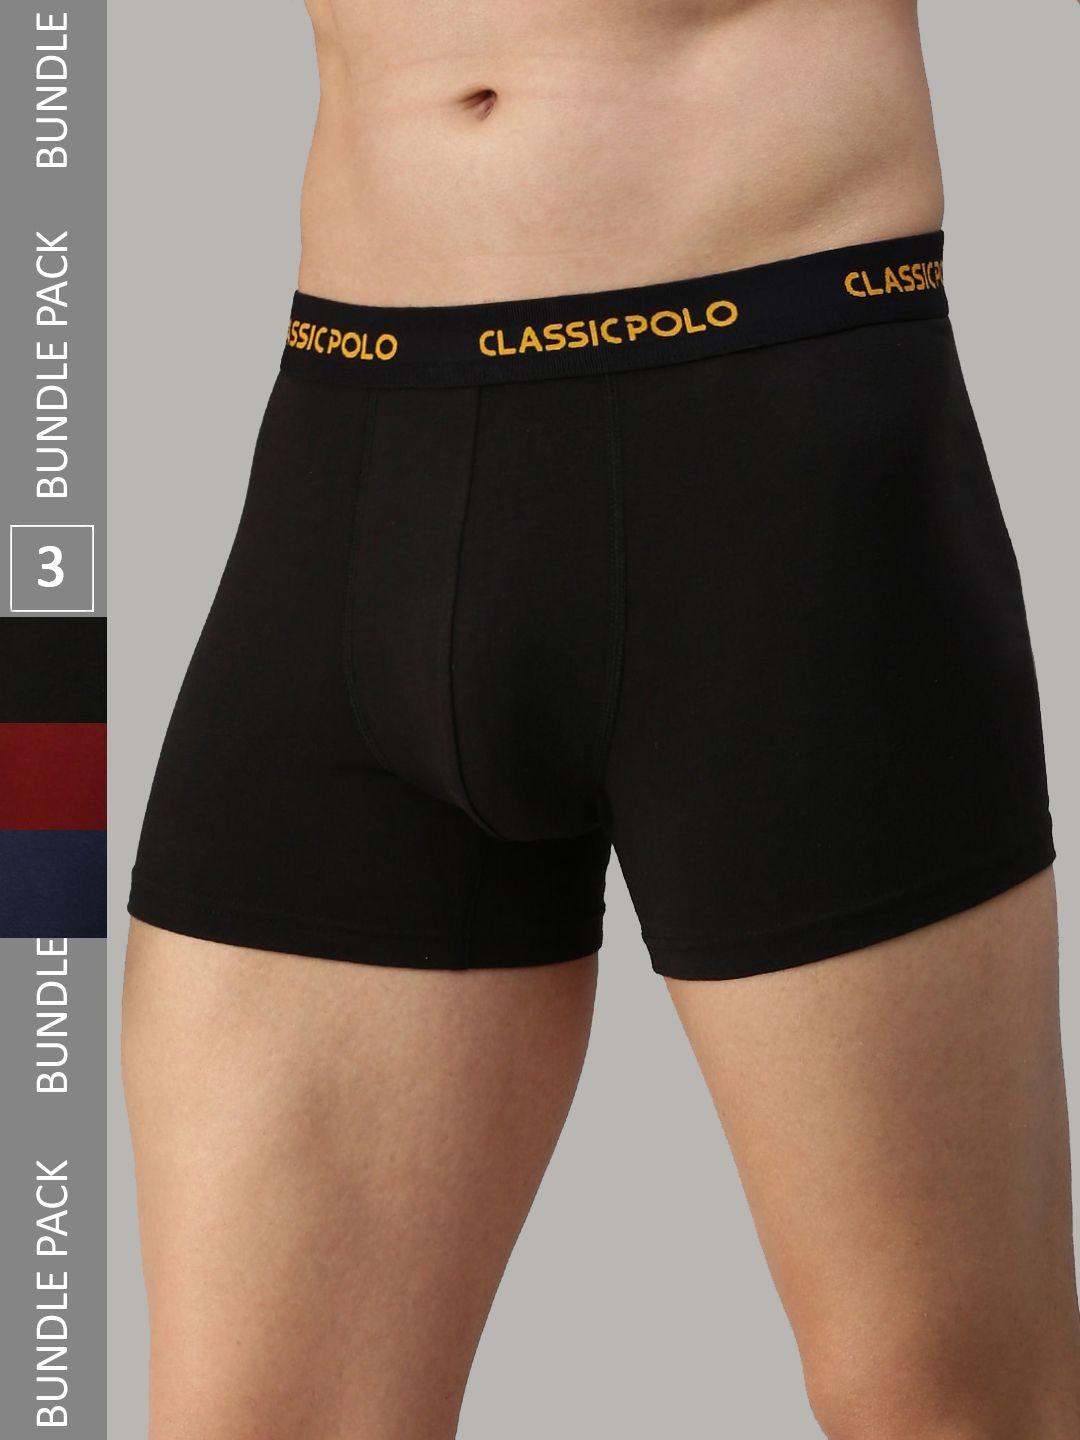 classic polo men pack of 3 anti-odour basic briefs